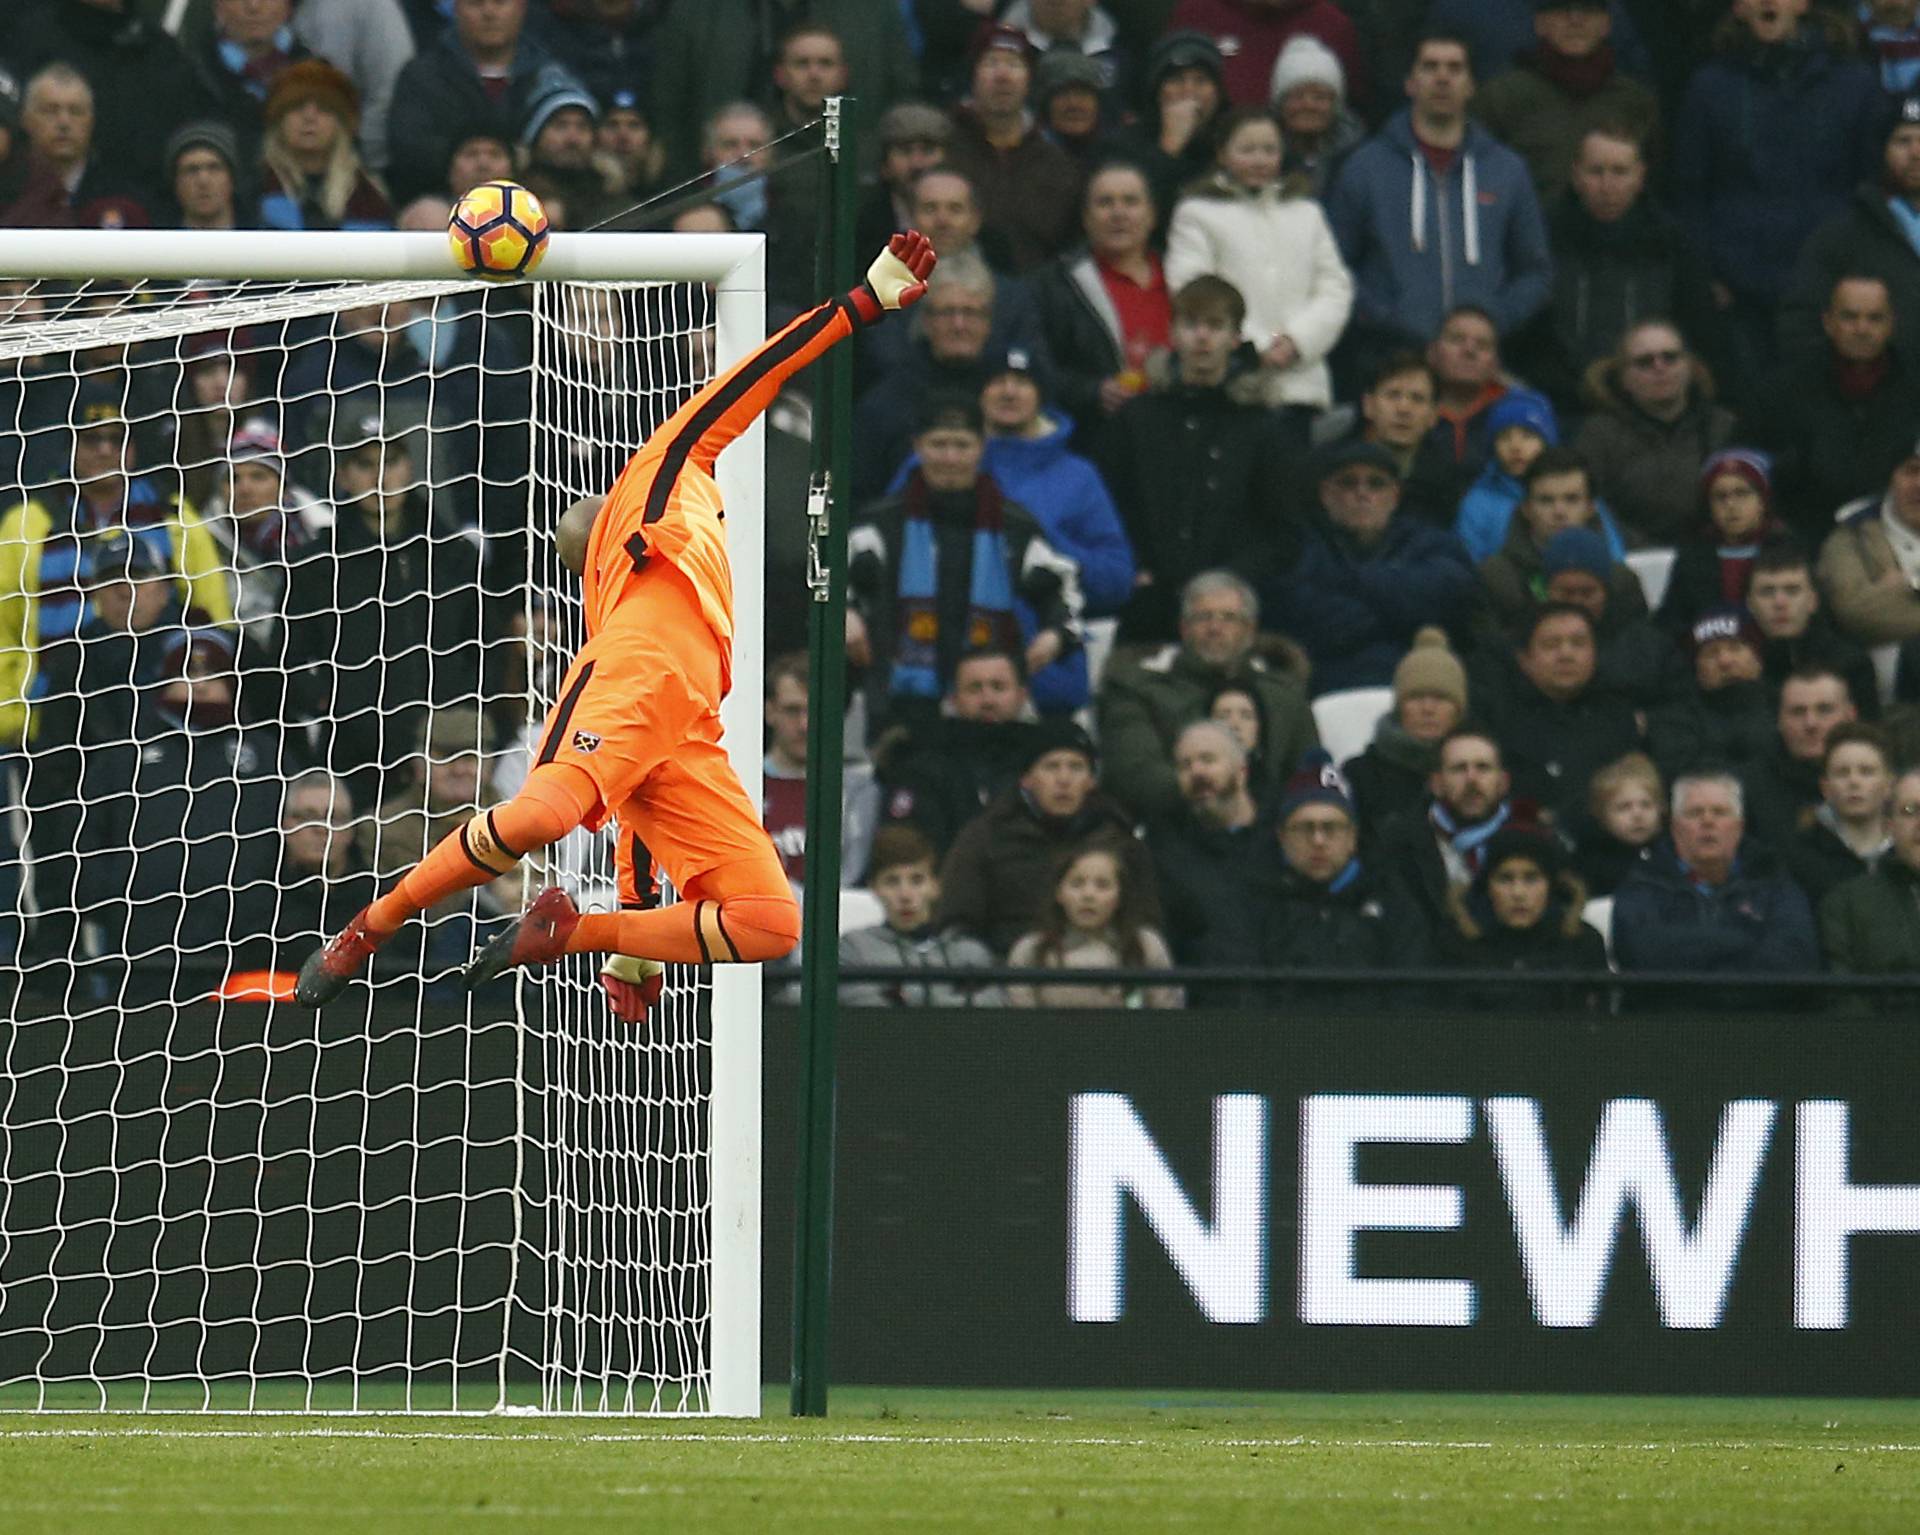 West Ham United's Darren Randolph dives to save a shot from West Bromwich Albion's Salomon Rondon that hits the crossbar